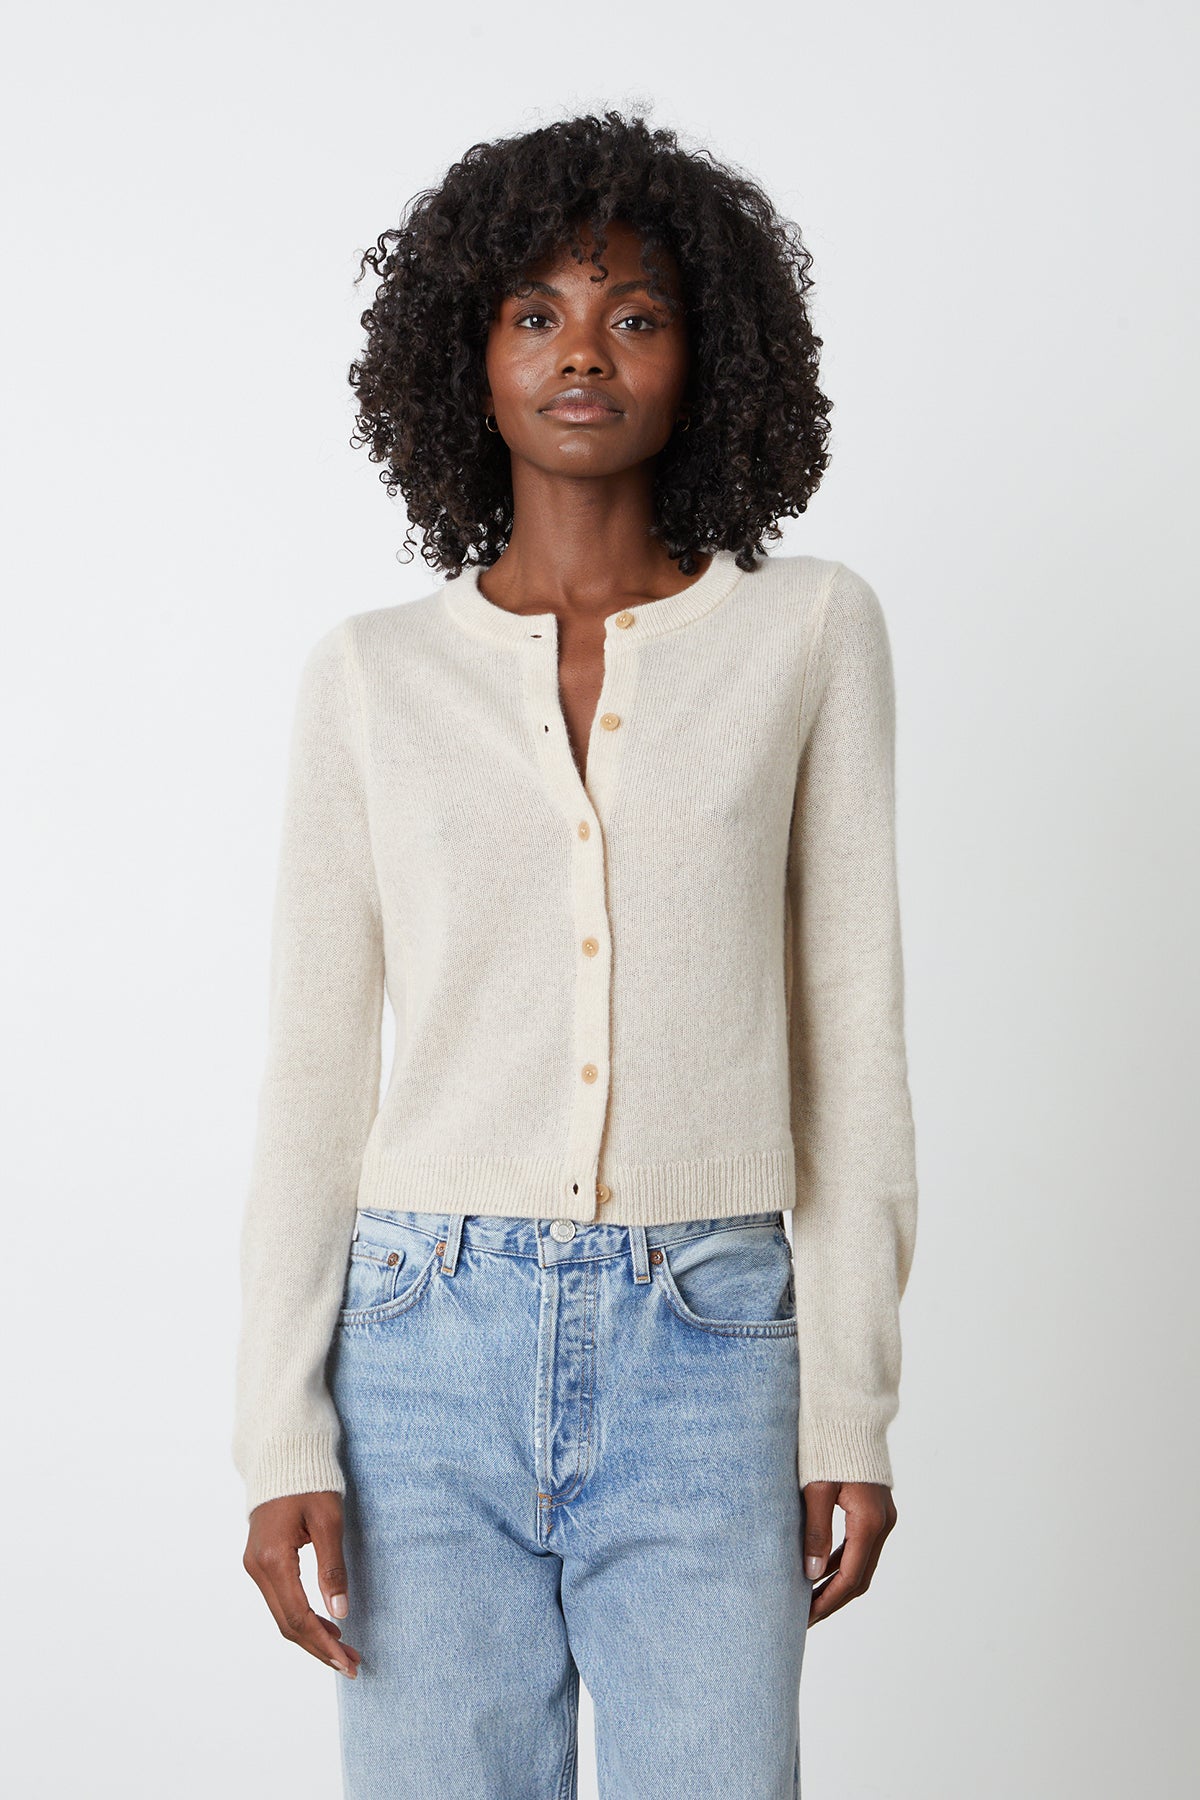   The model is wearing a NANI CASHMERE CARDIGAN by Velvet by Graham & Spencer and jeans. 